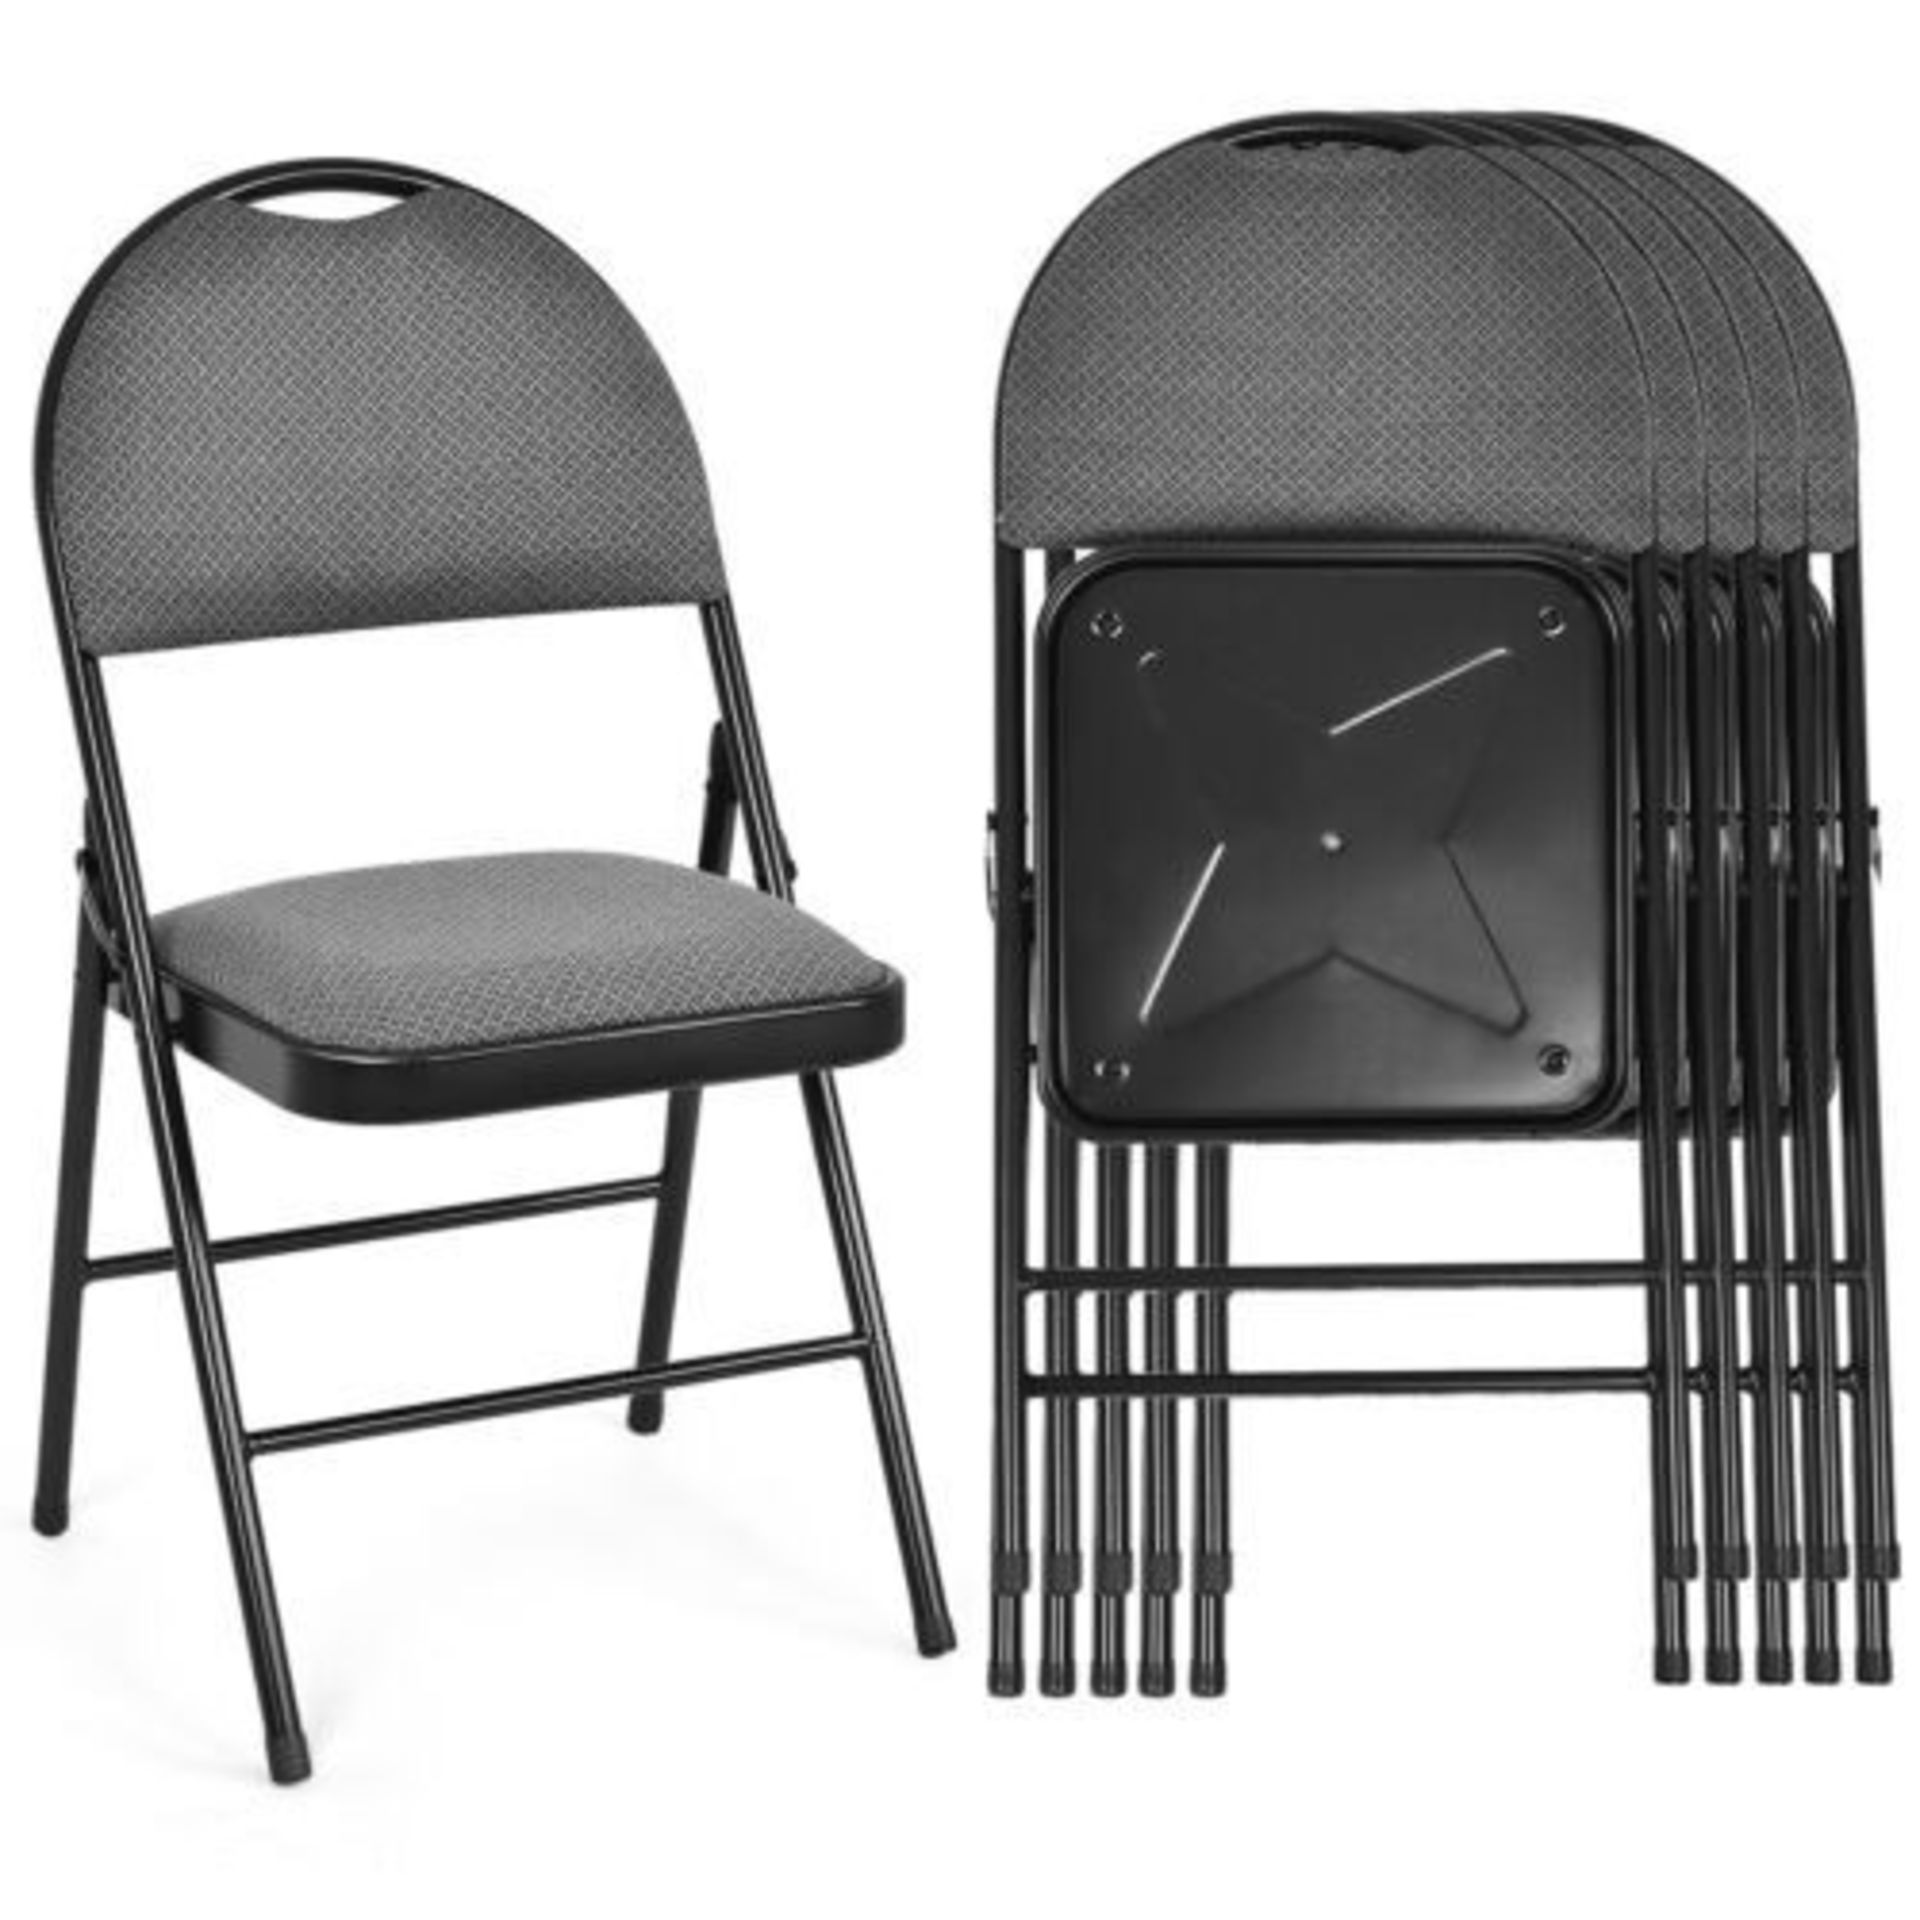 6 Pieces Folding Chairs Set with Handle Hole and Portable Backrest - ER53